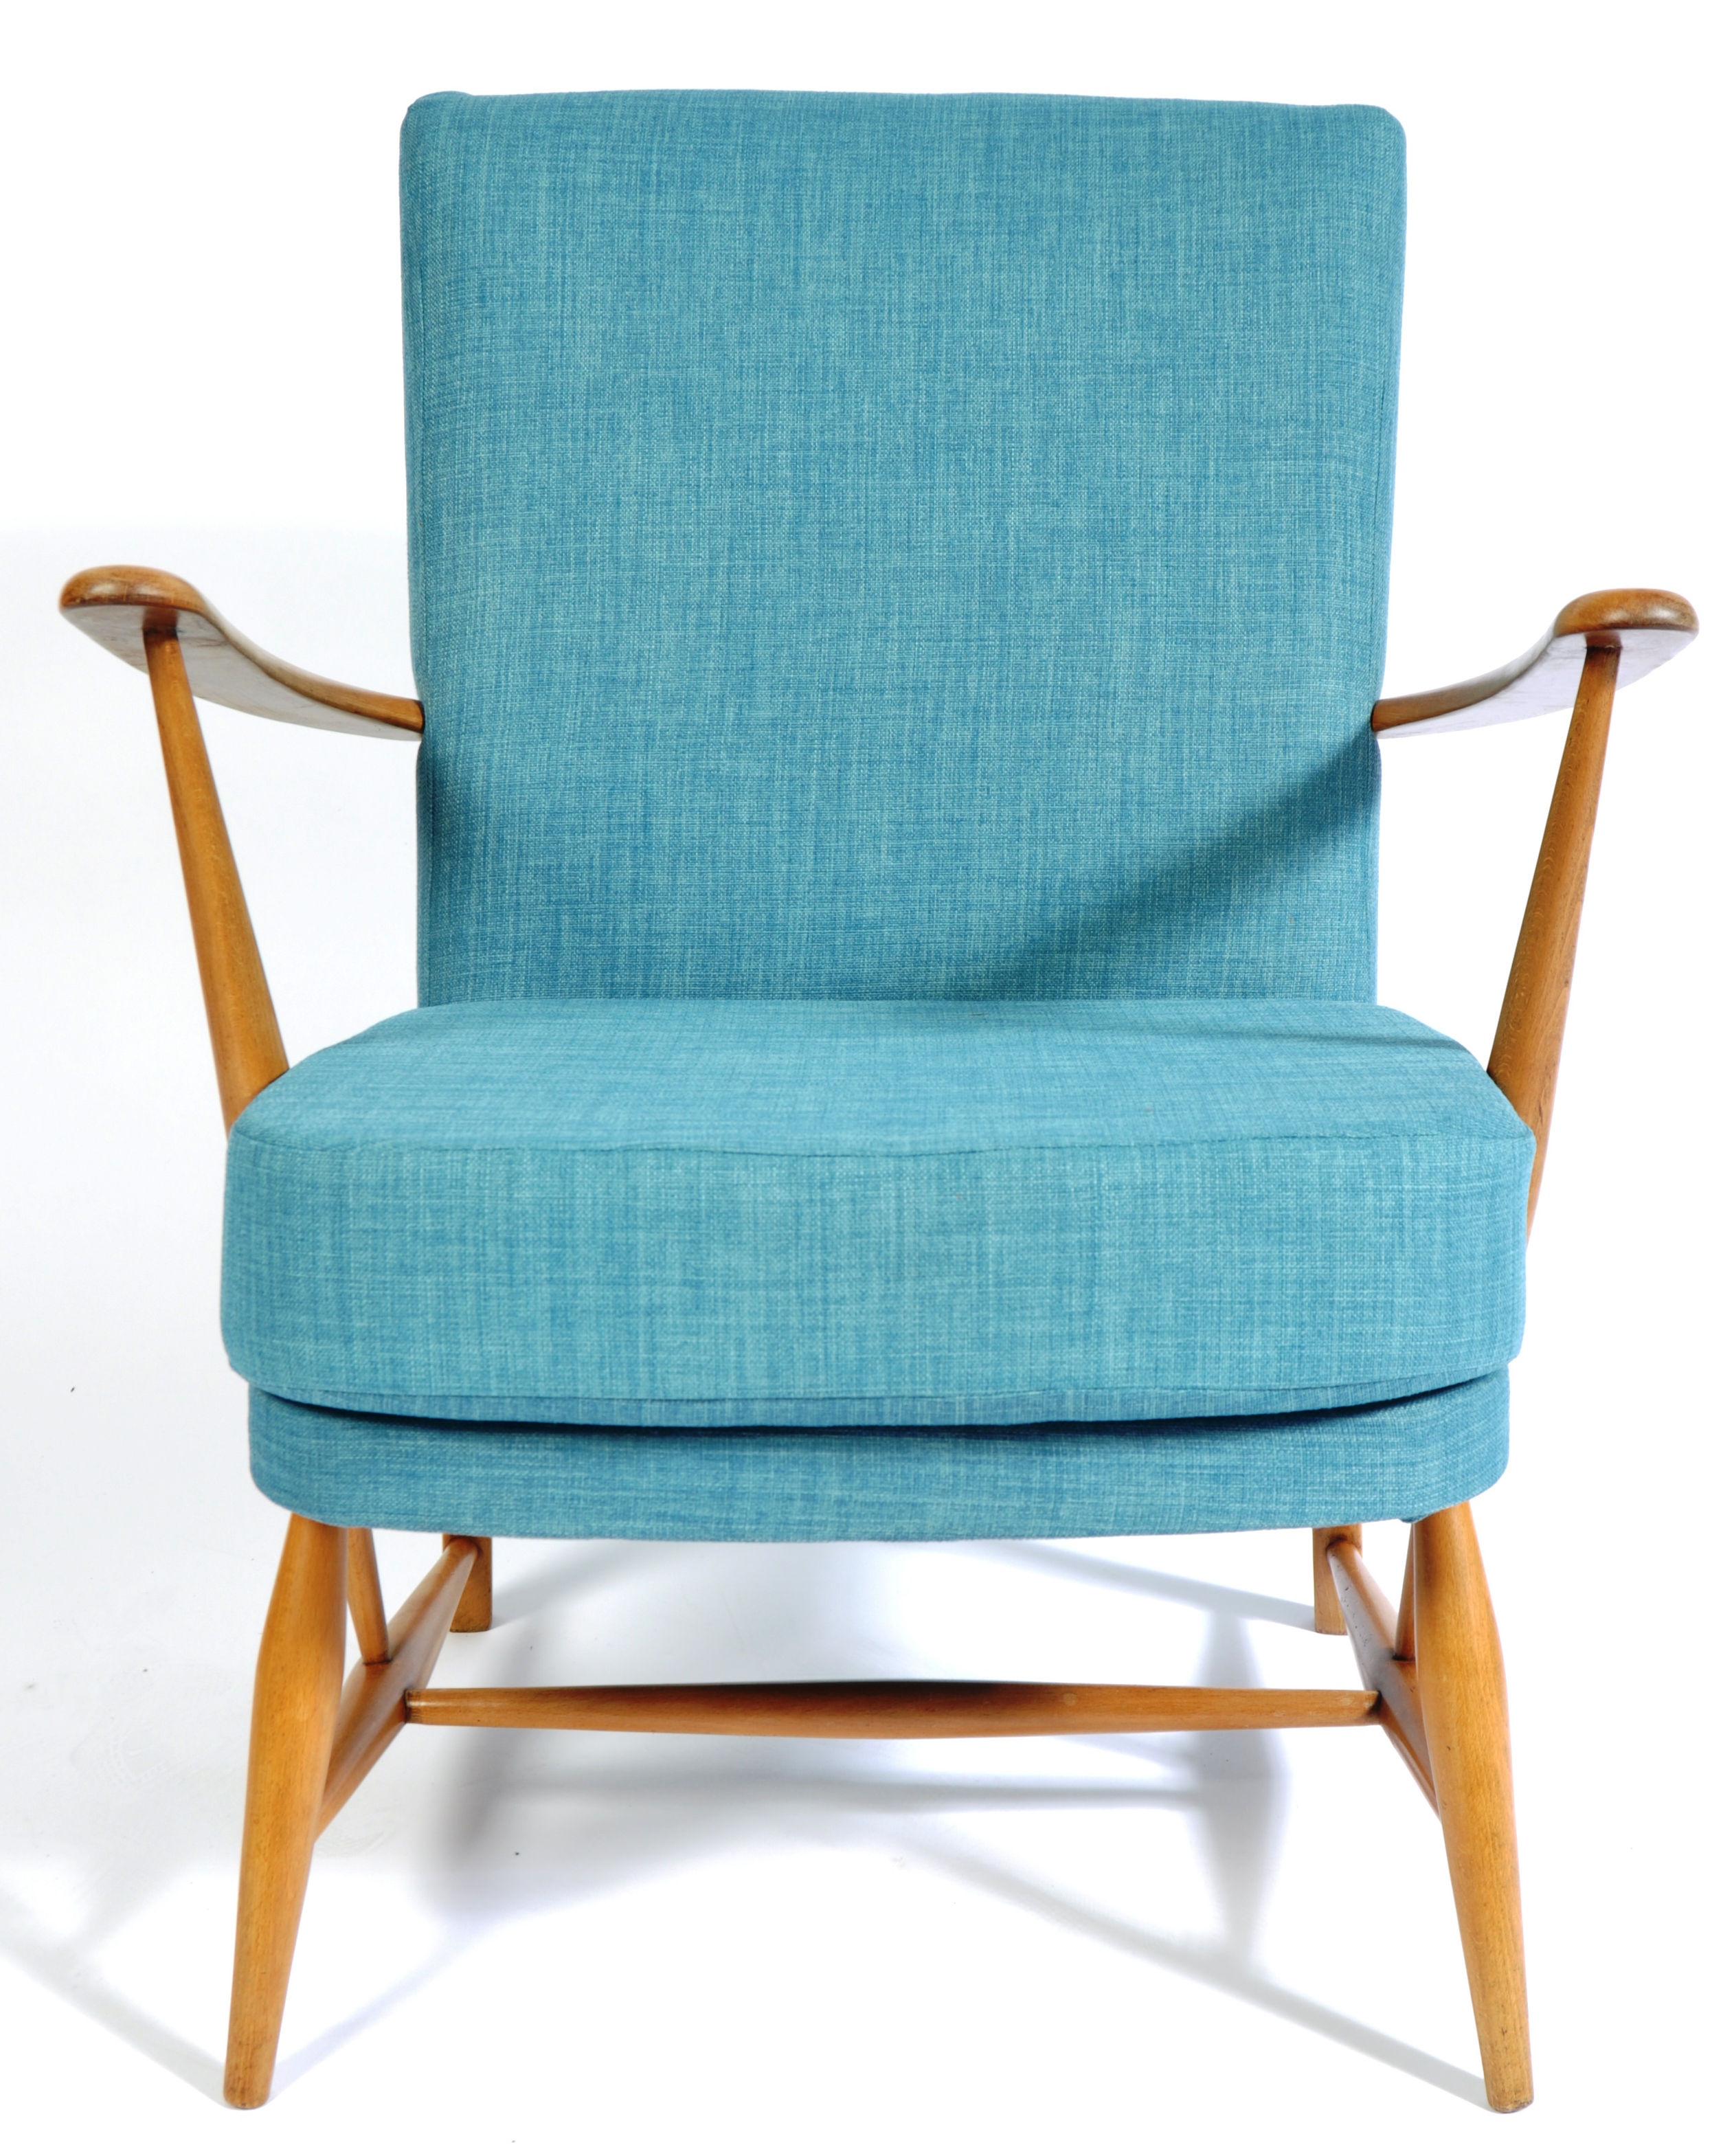 ERCOL MODEL 248 1950'S BEECH AND ELM LOUNGE CHAIR BY L. ERCOLANI - Image 4 of 6